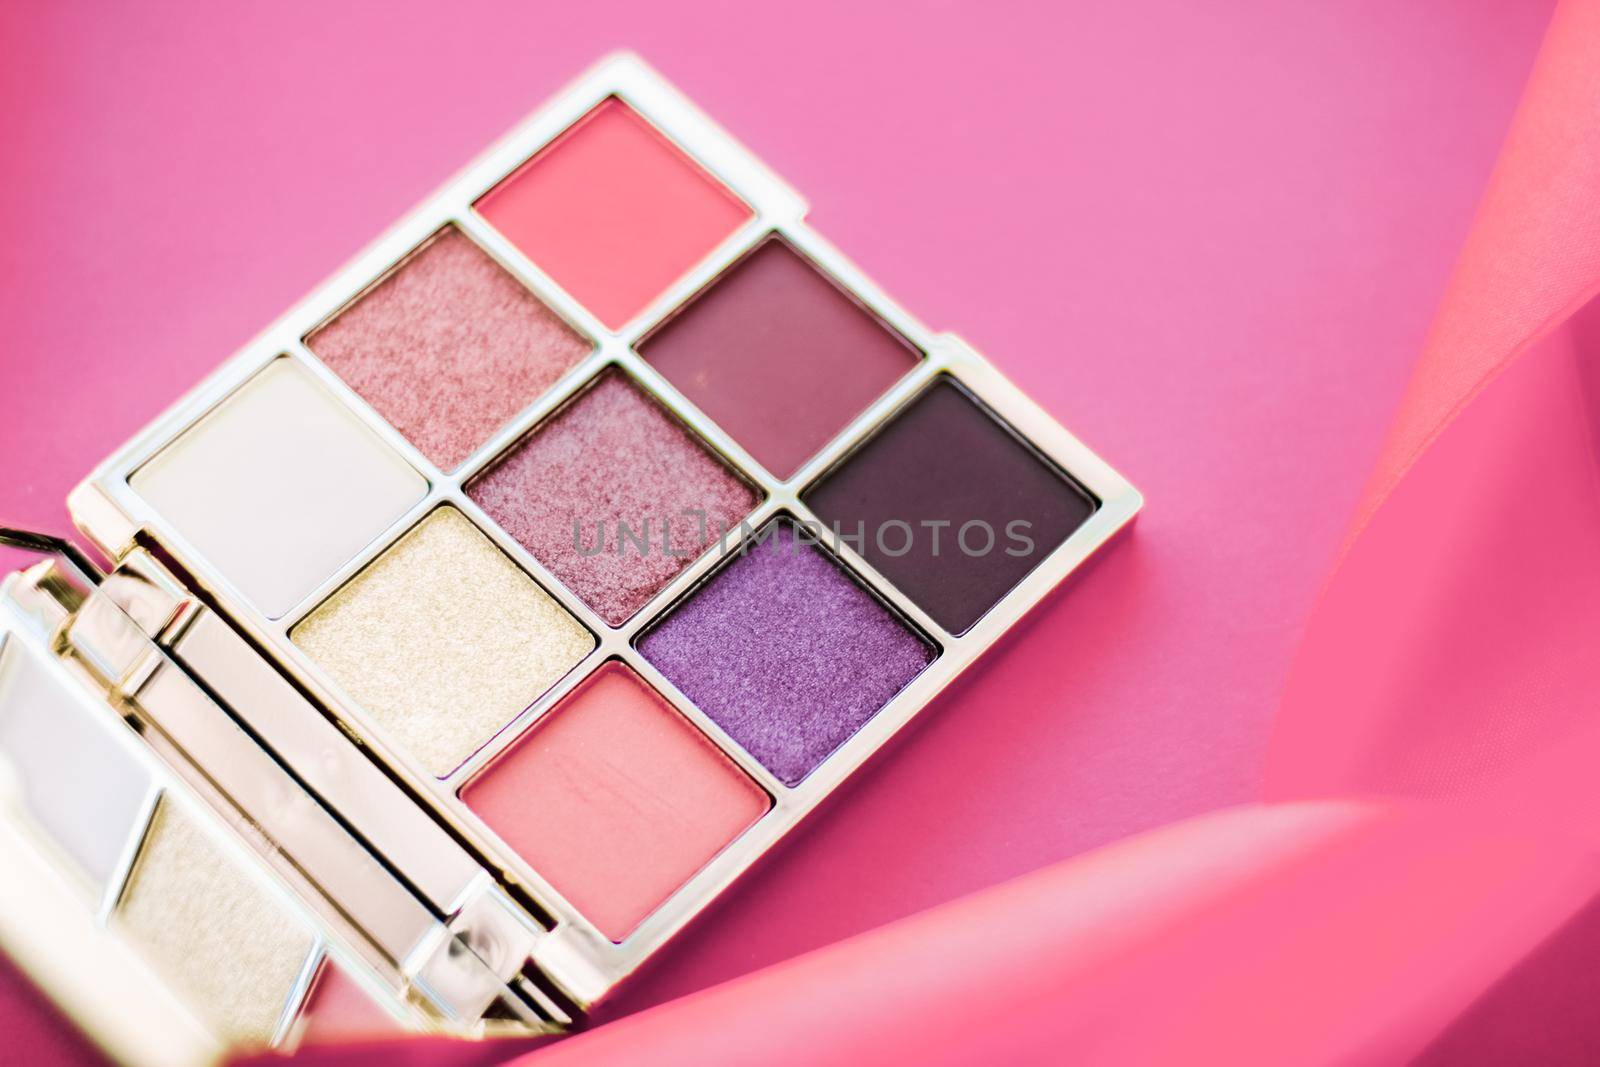 Eyeshadow palette and make-up brush on rose background, eye shadows cosmetics product for luxury beauty brand promotion and holiday fashion blog design by Anneleven